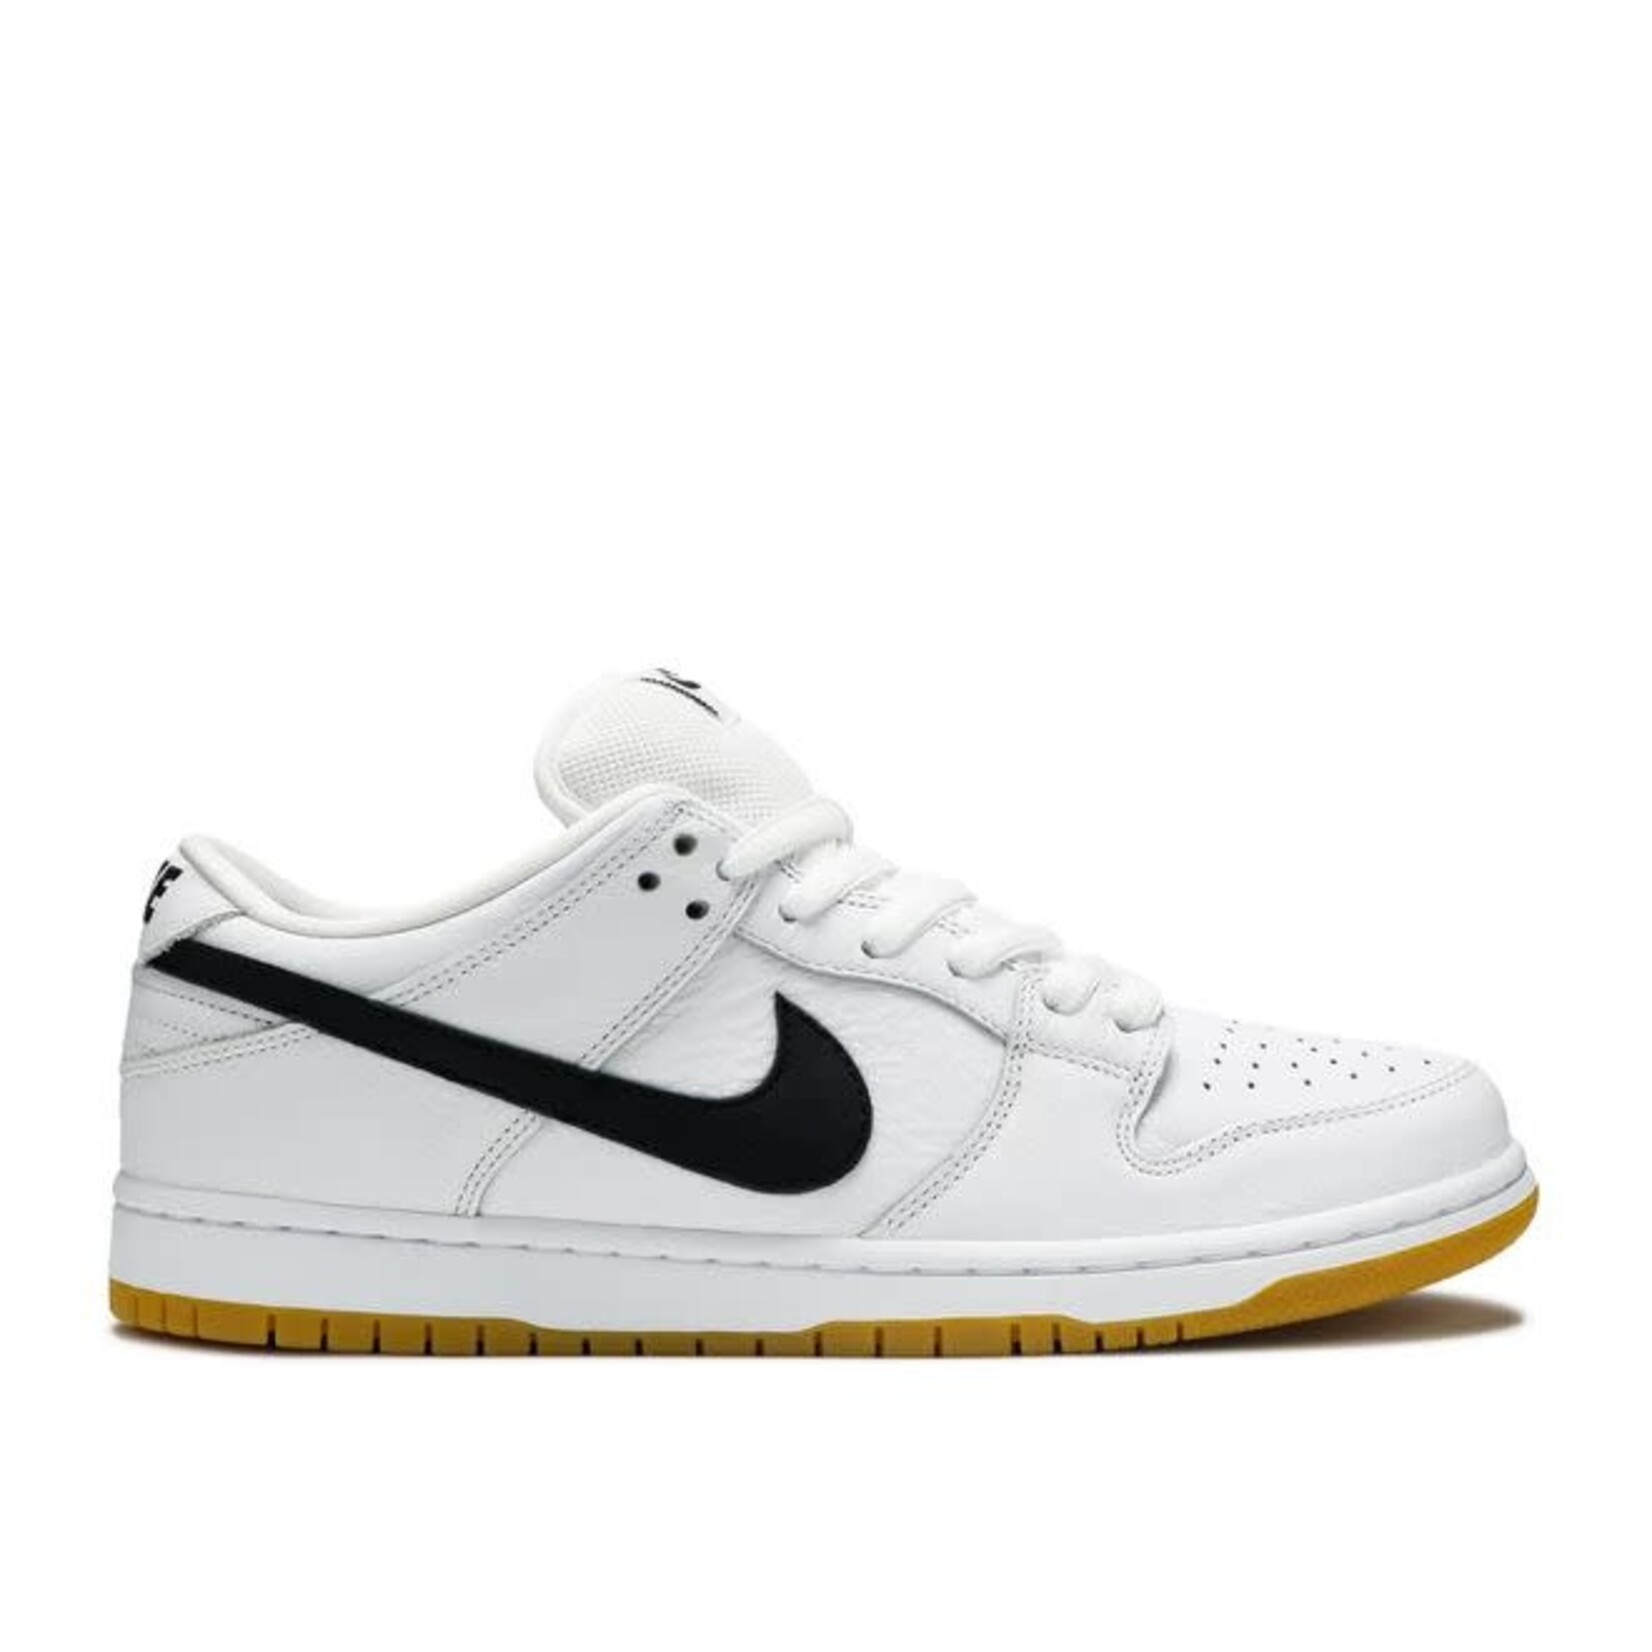 Nike Nike SB Dunk Low Pro White Gum Size 11.5, DS BRAND NEW